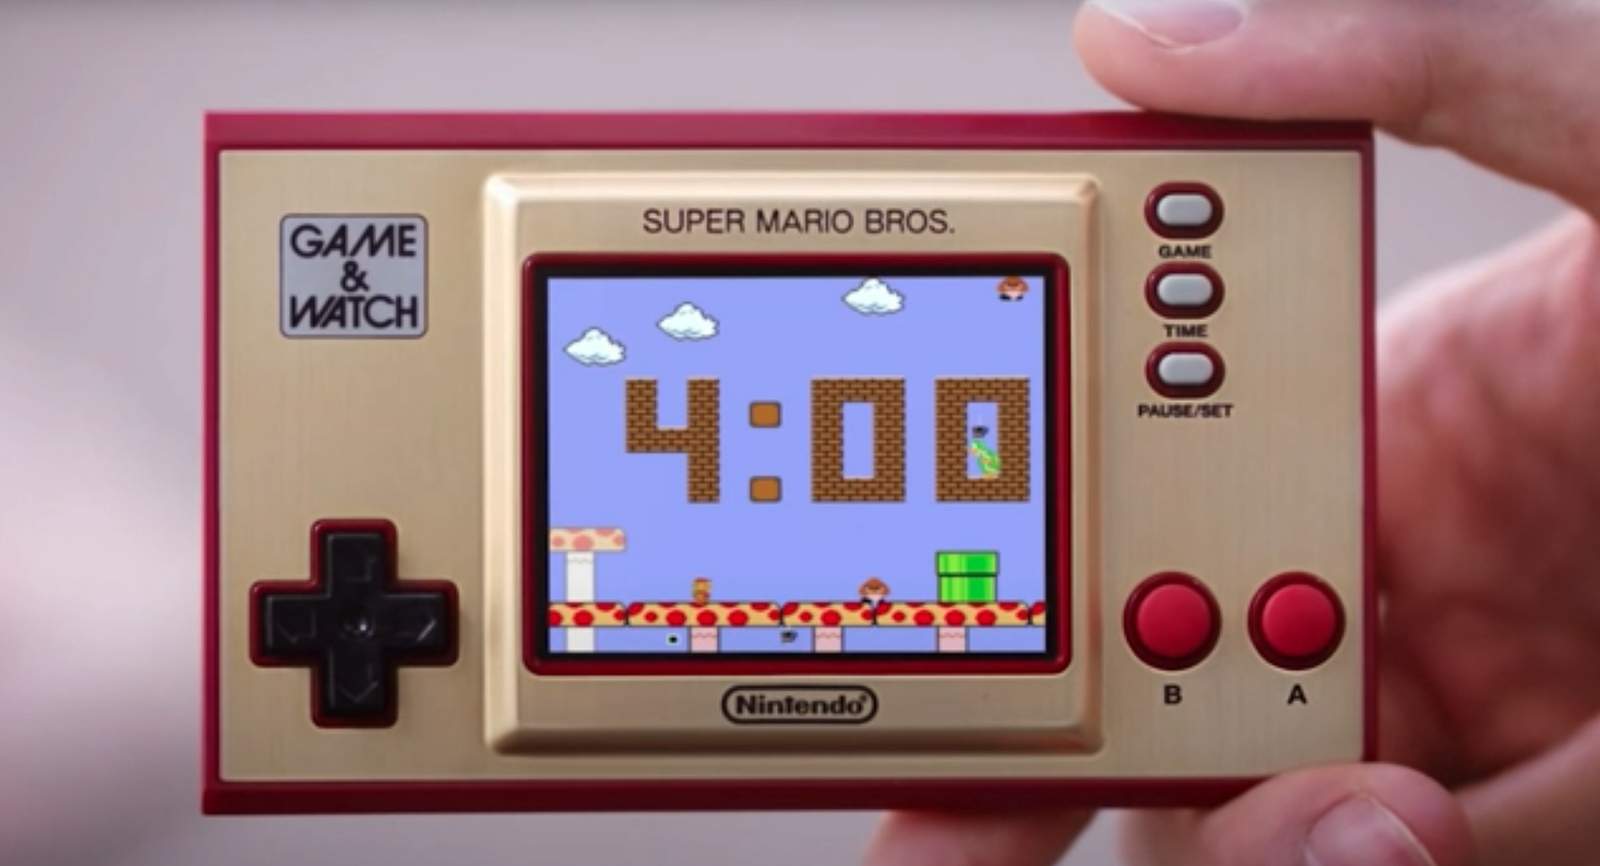 Nintendo reviving one of its oldest handhelds from ’80s